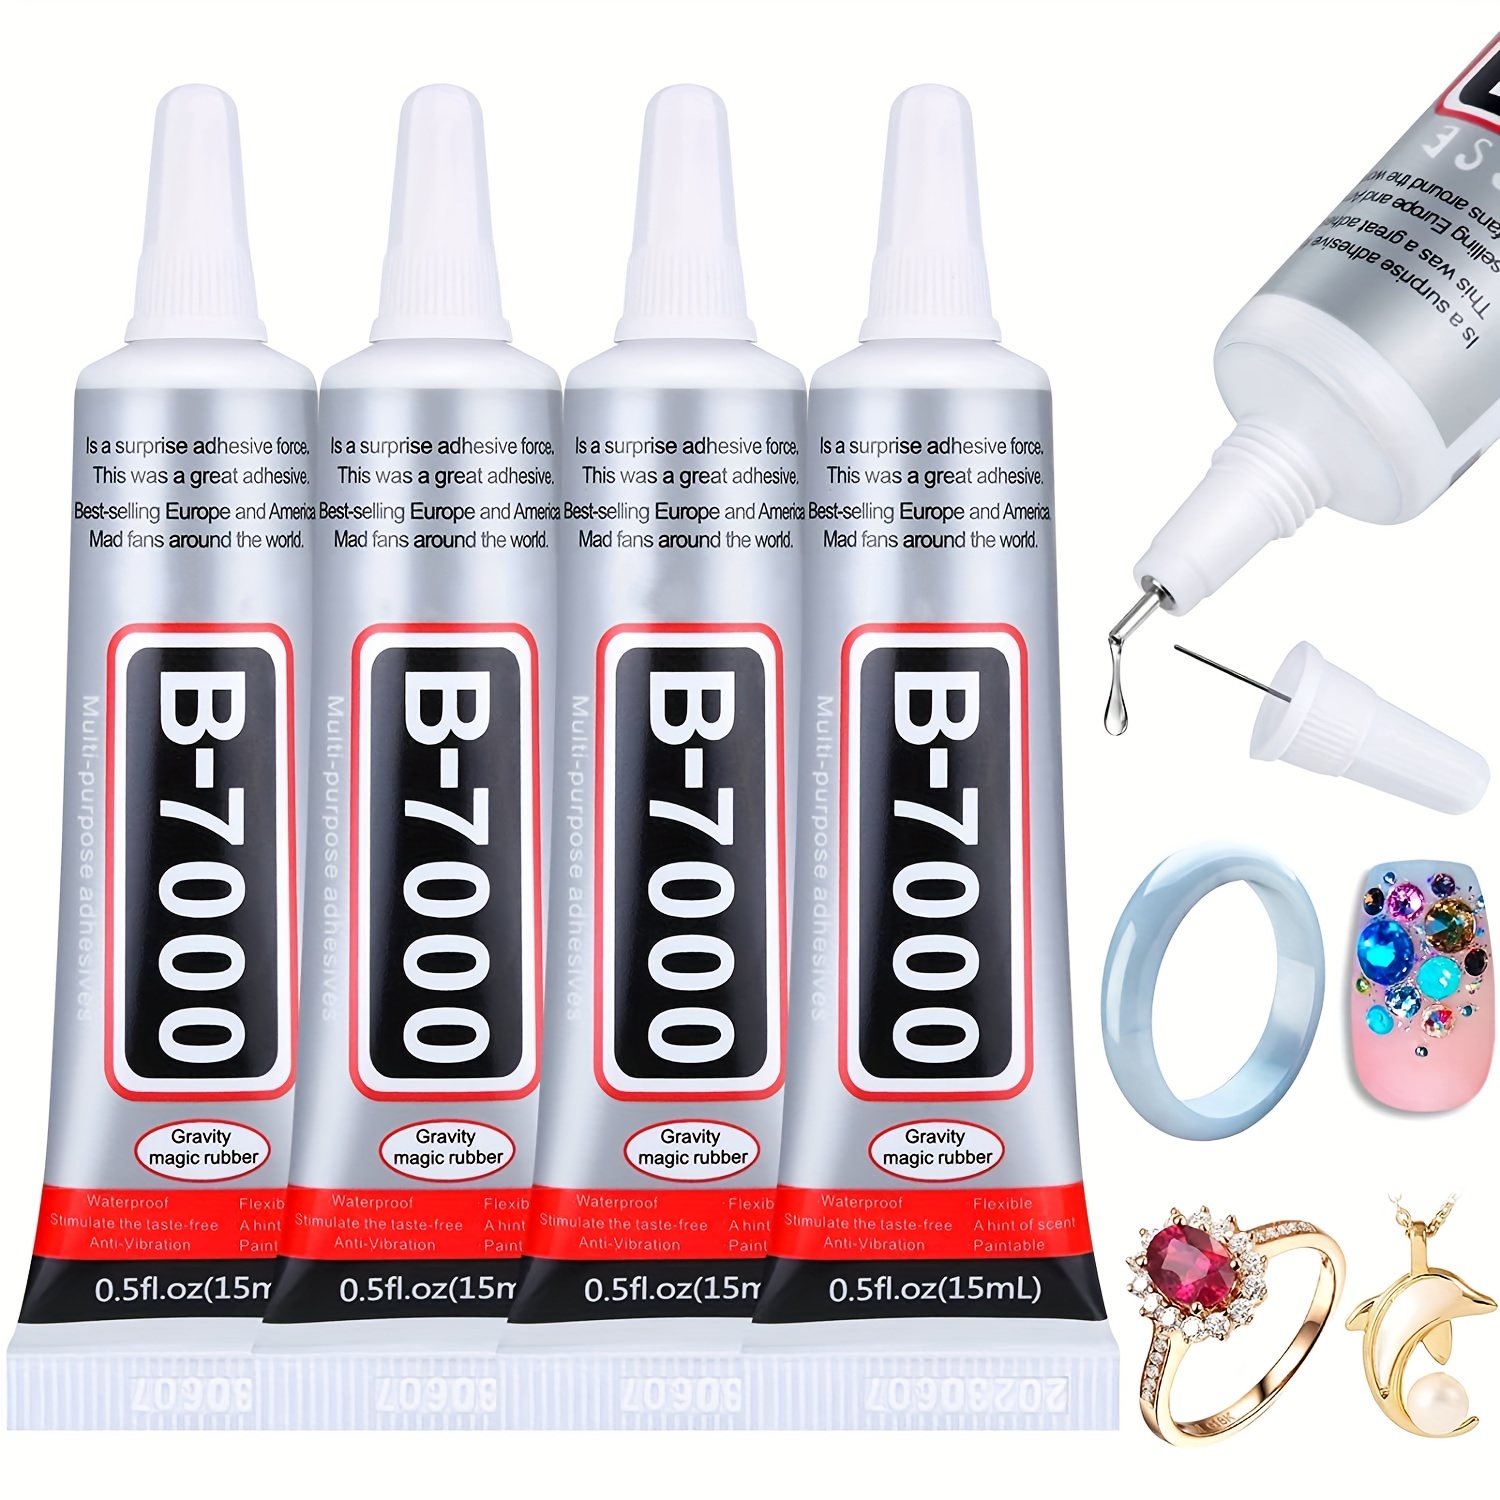 B7000 Craft Glue For Jewelry Making - Multi-Function B-7000 Super Adhesive  Glues Liquid Fusion Glue For Rhinestones Crafts, Clothes Shoes, Fabric, Jewelry  Making, Cell Phones